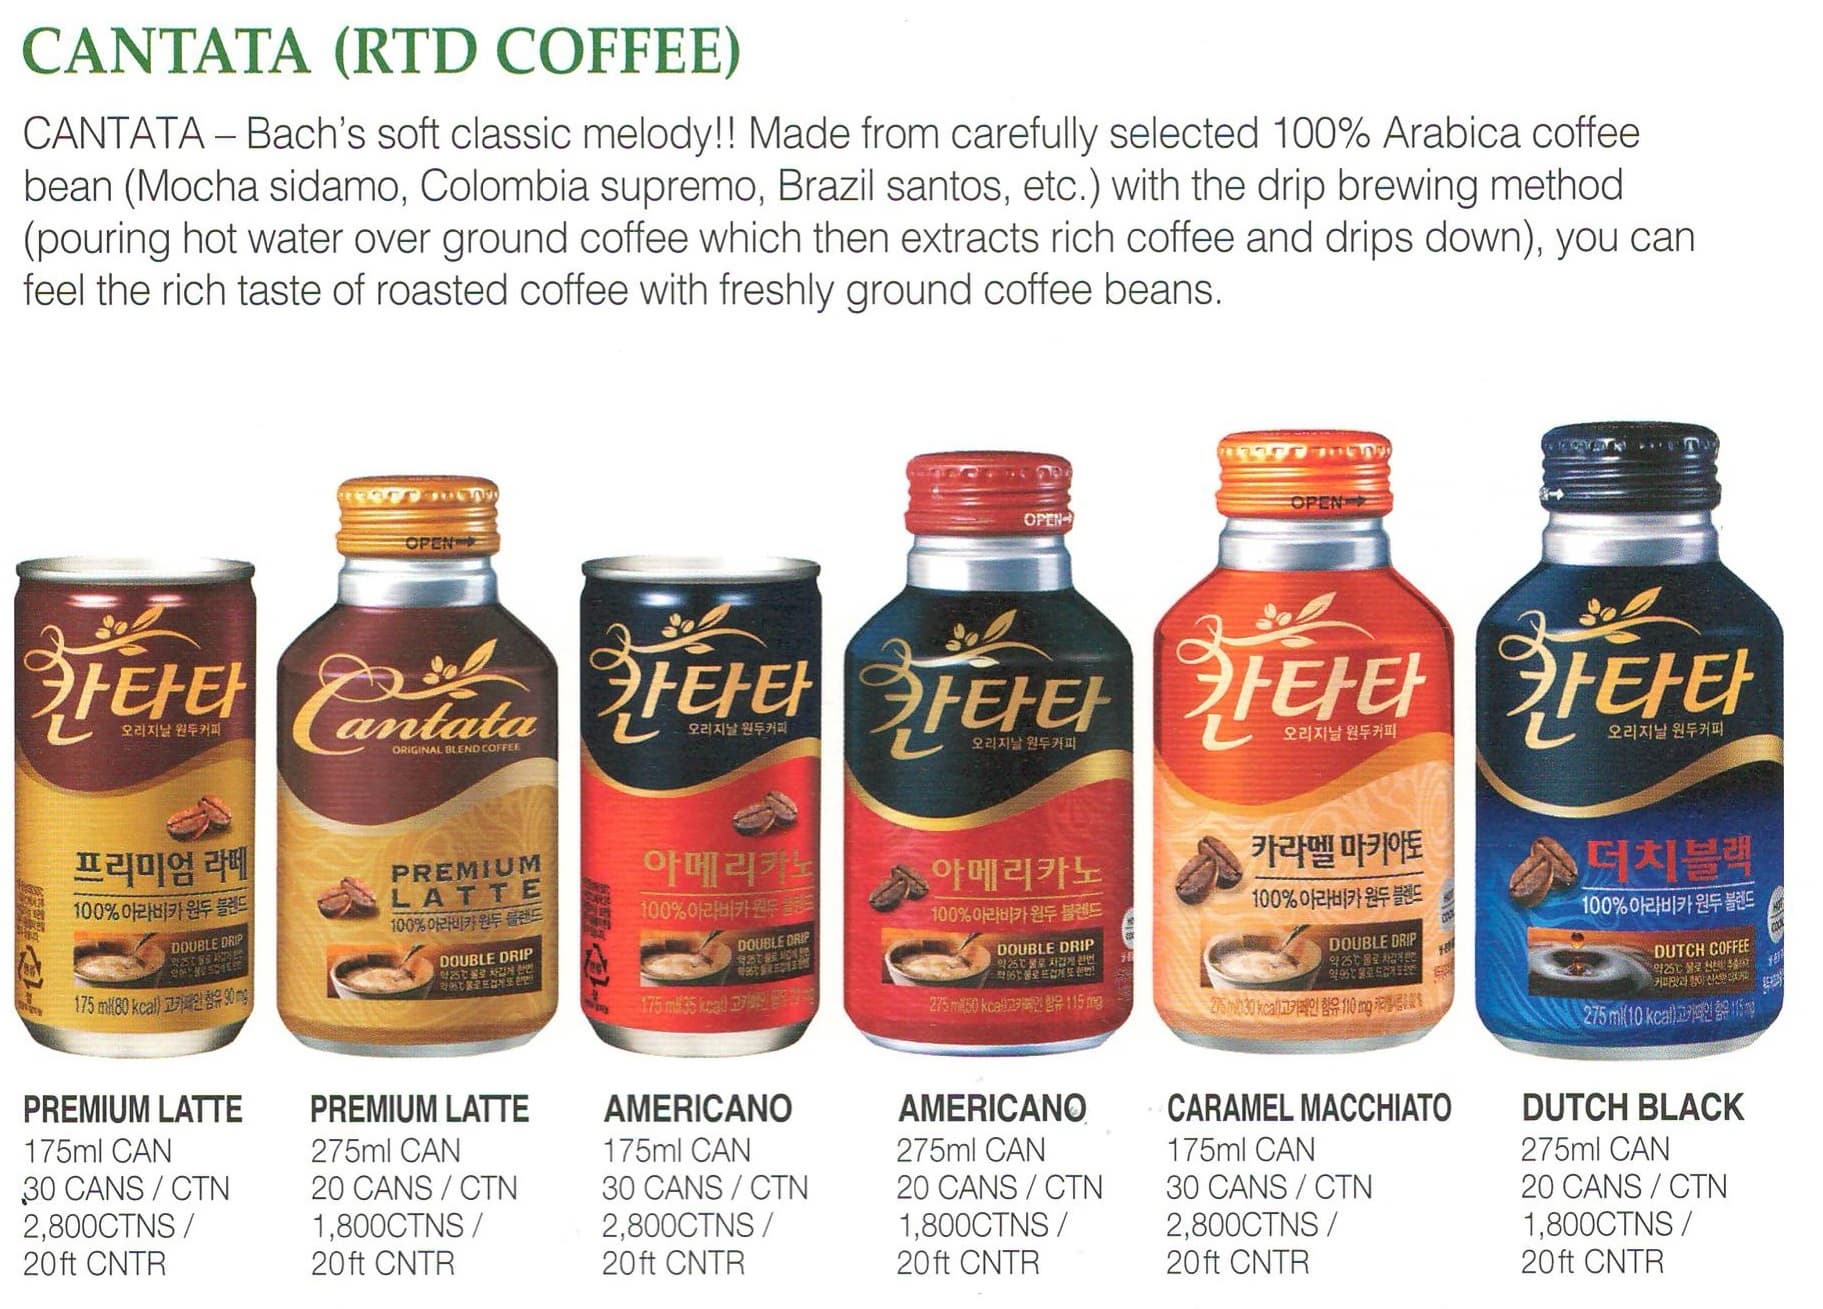 LOTTE RTD COFFEE_CANTATA_ LET_S BE_